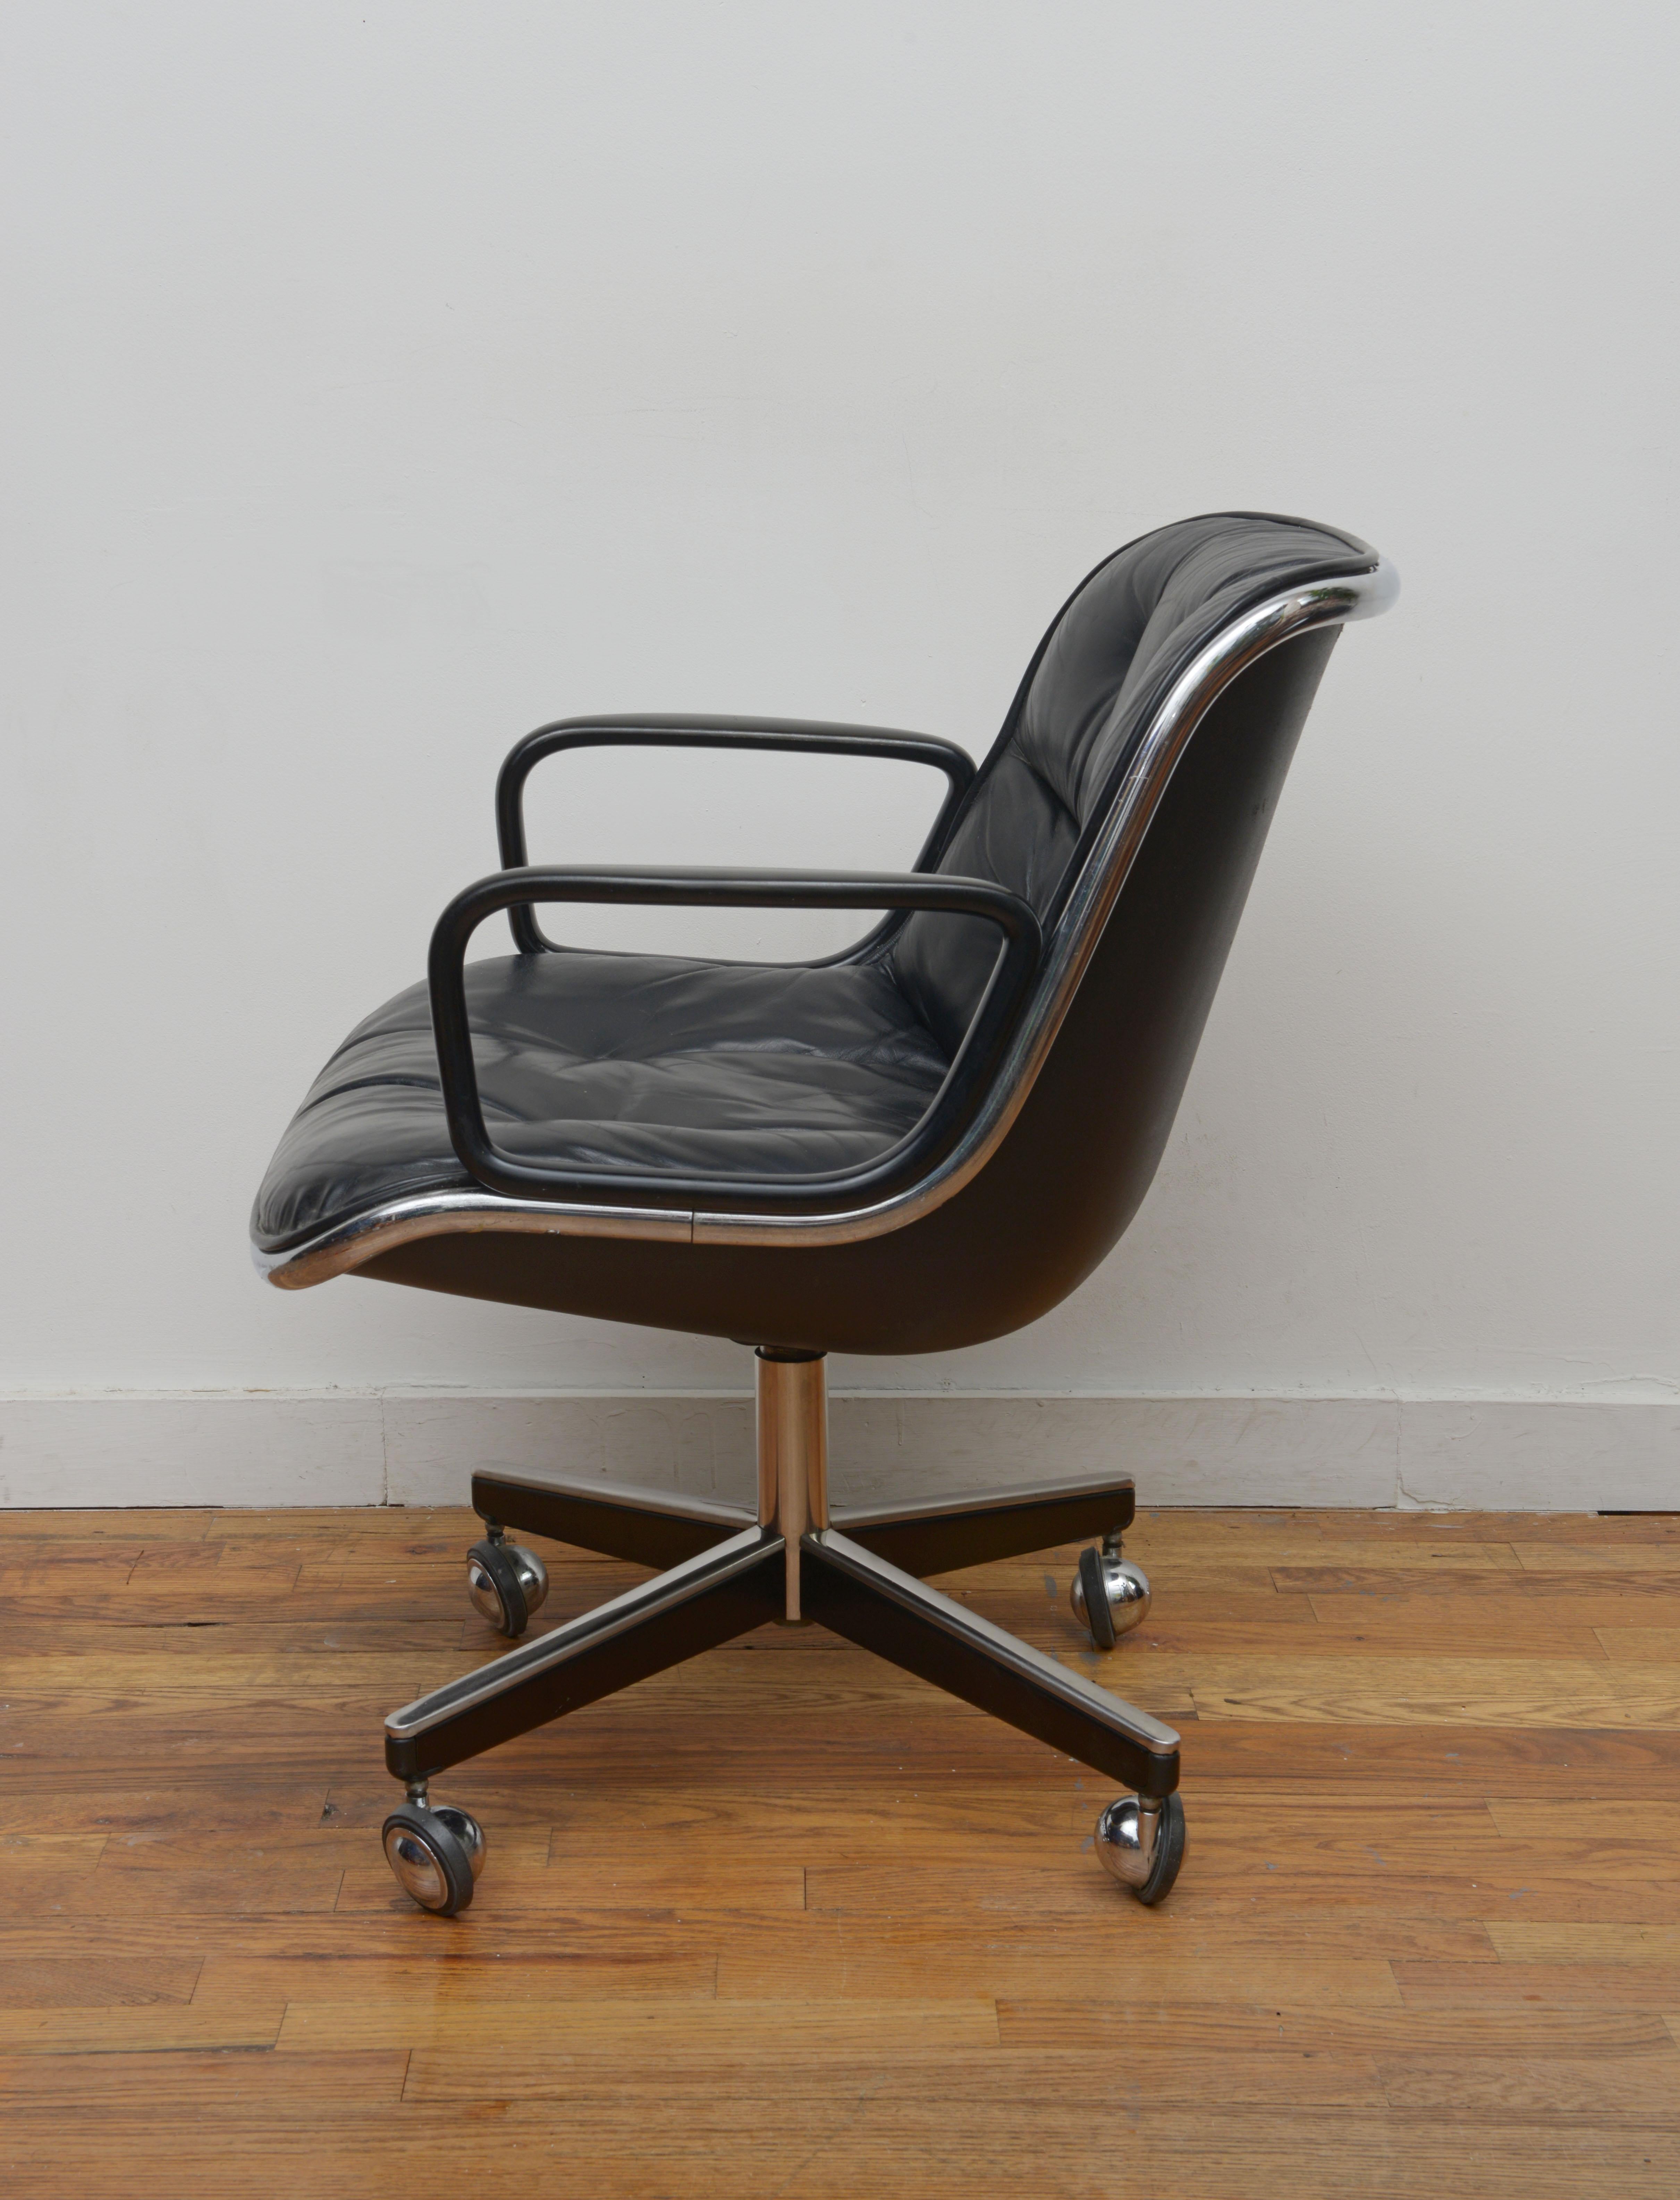 70s office chair